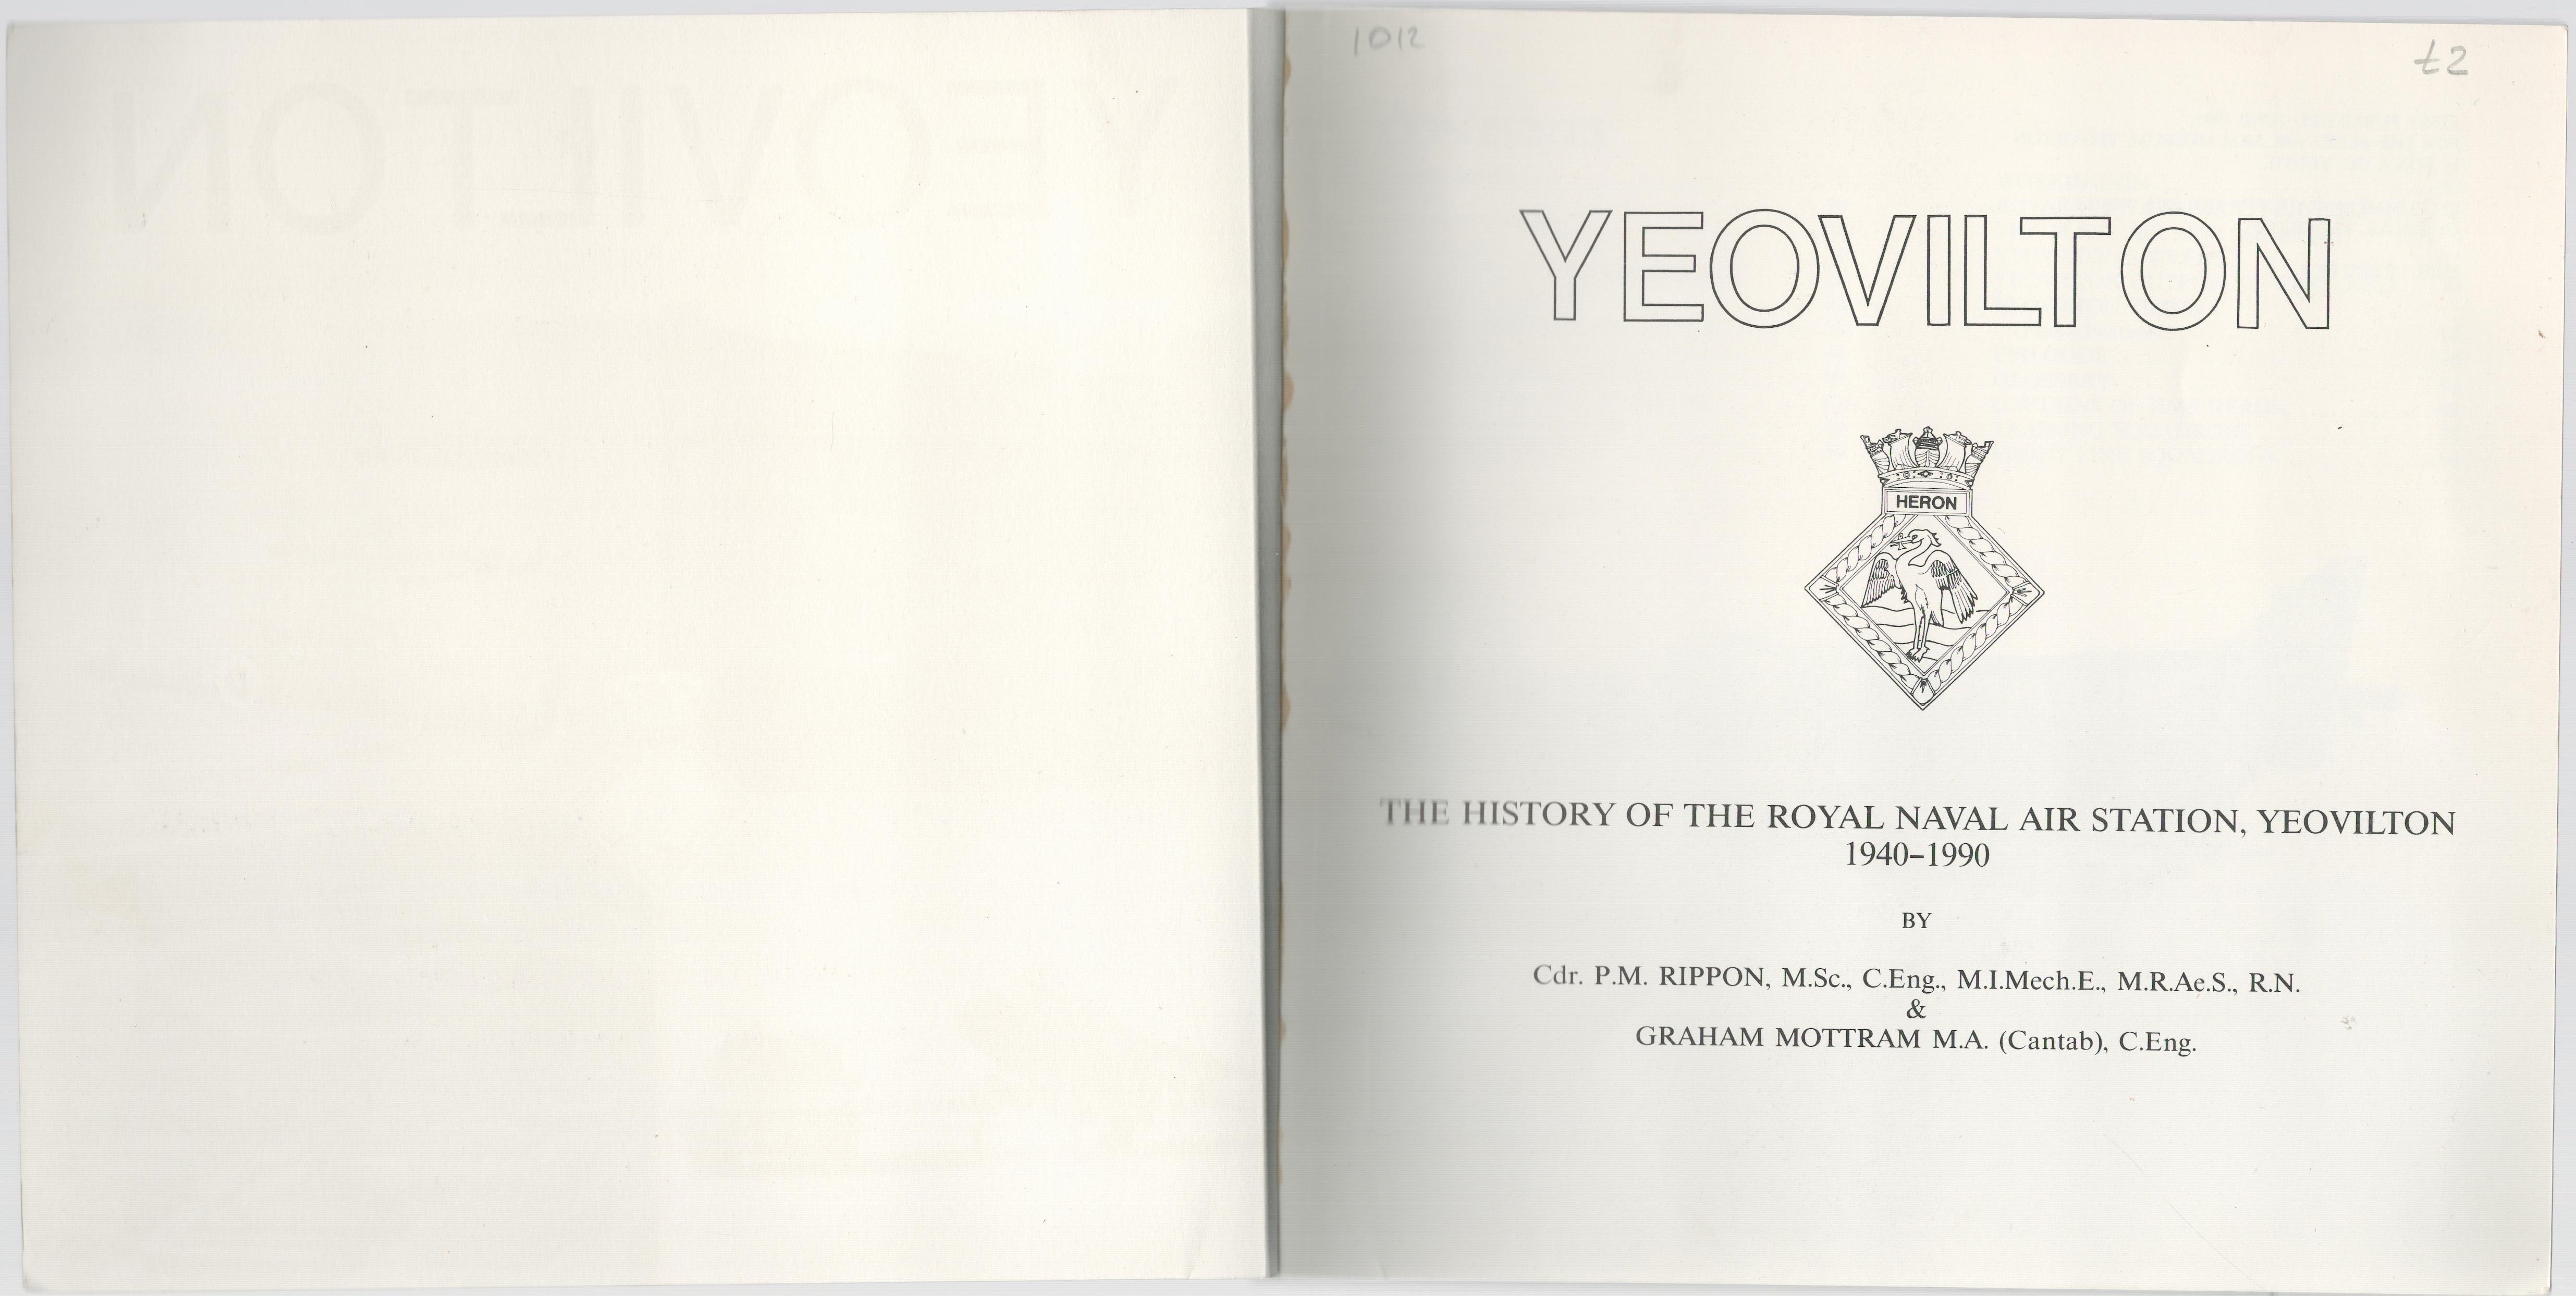 Yeovilton The History Of Paperback Book by P. M. Rippon and Graham Mottram. Published in 1990. 95 - Image 2 of 3